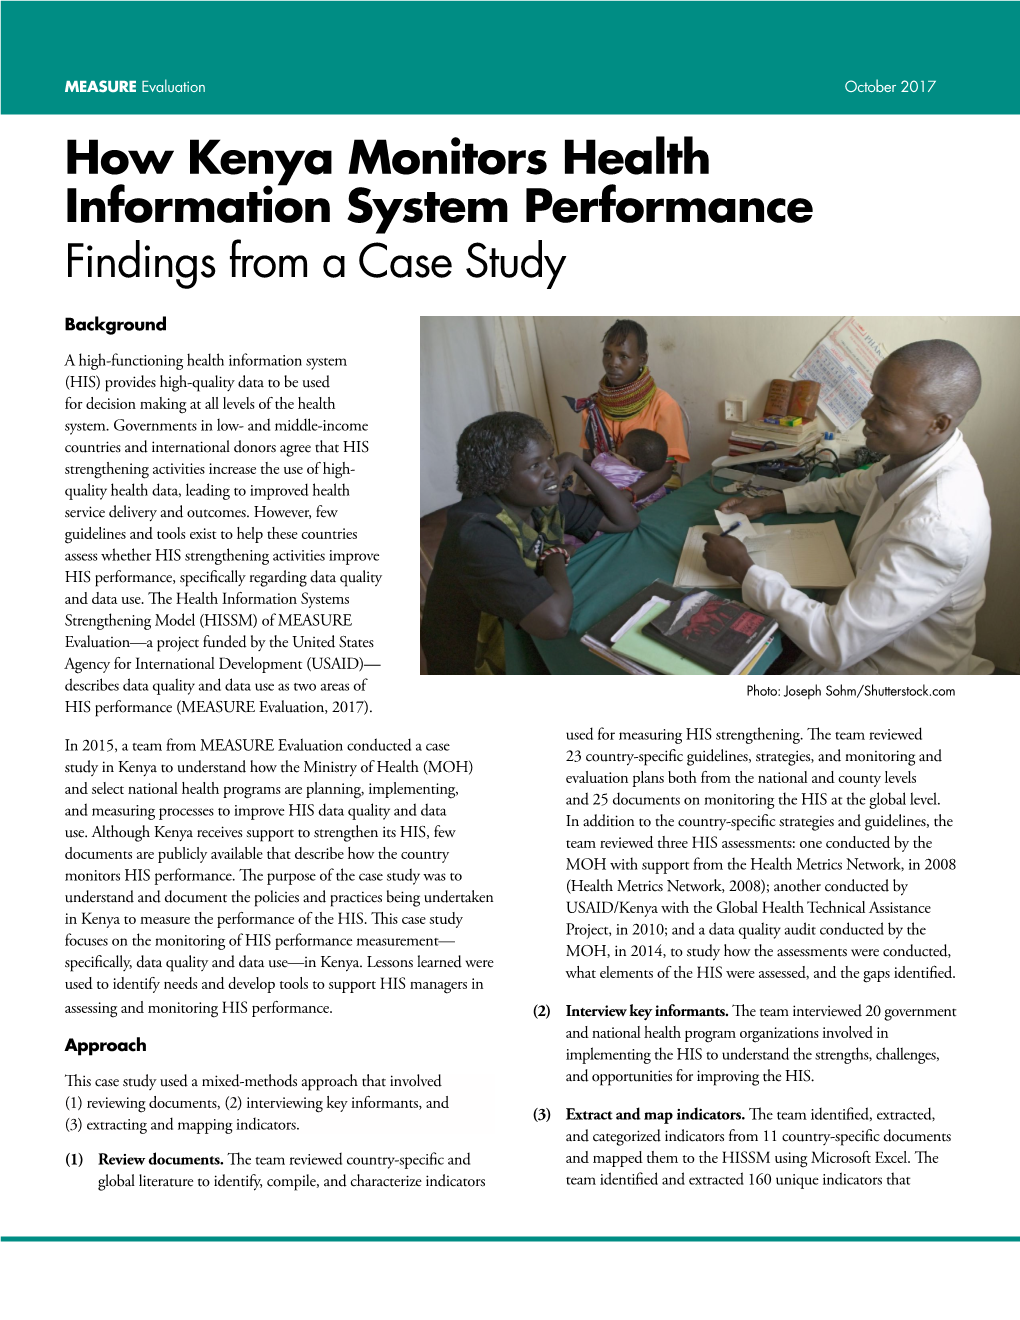 How Kenya Monitors Health Information System Performance Findings from a Case Study